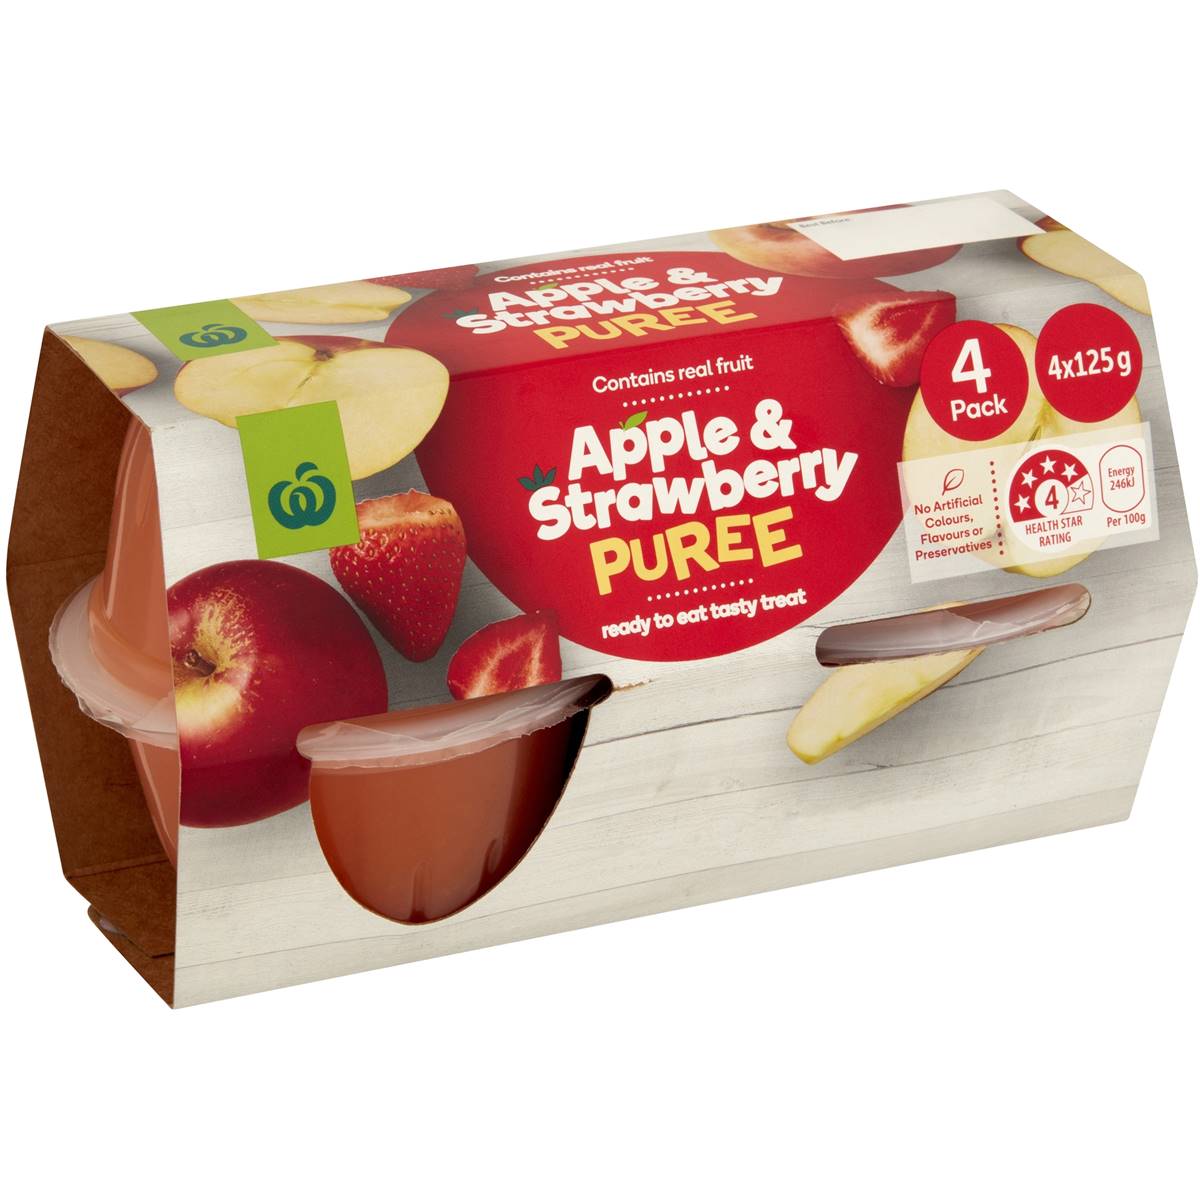 Calories in Woolworths Apple & Strawberry Puree